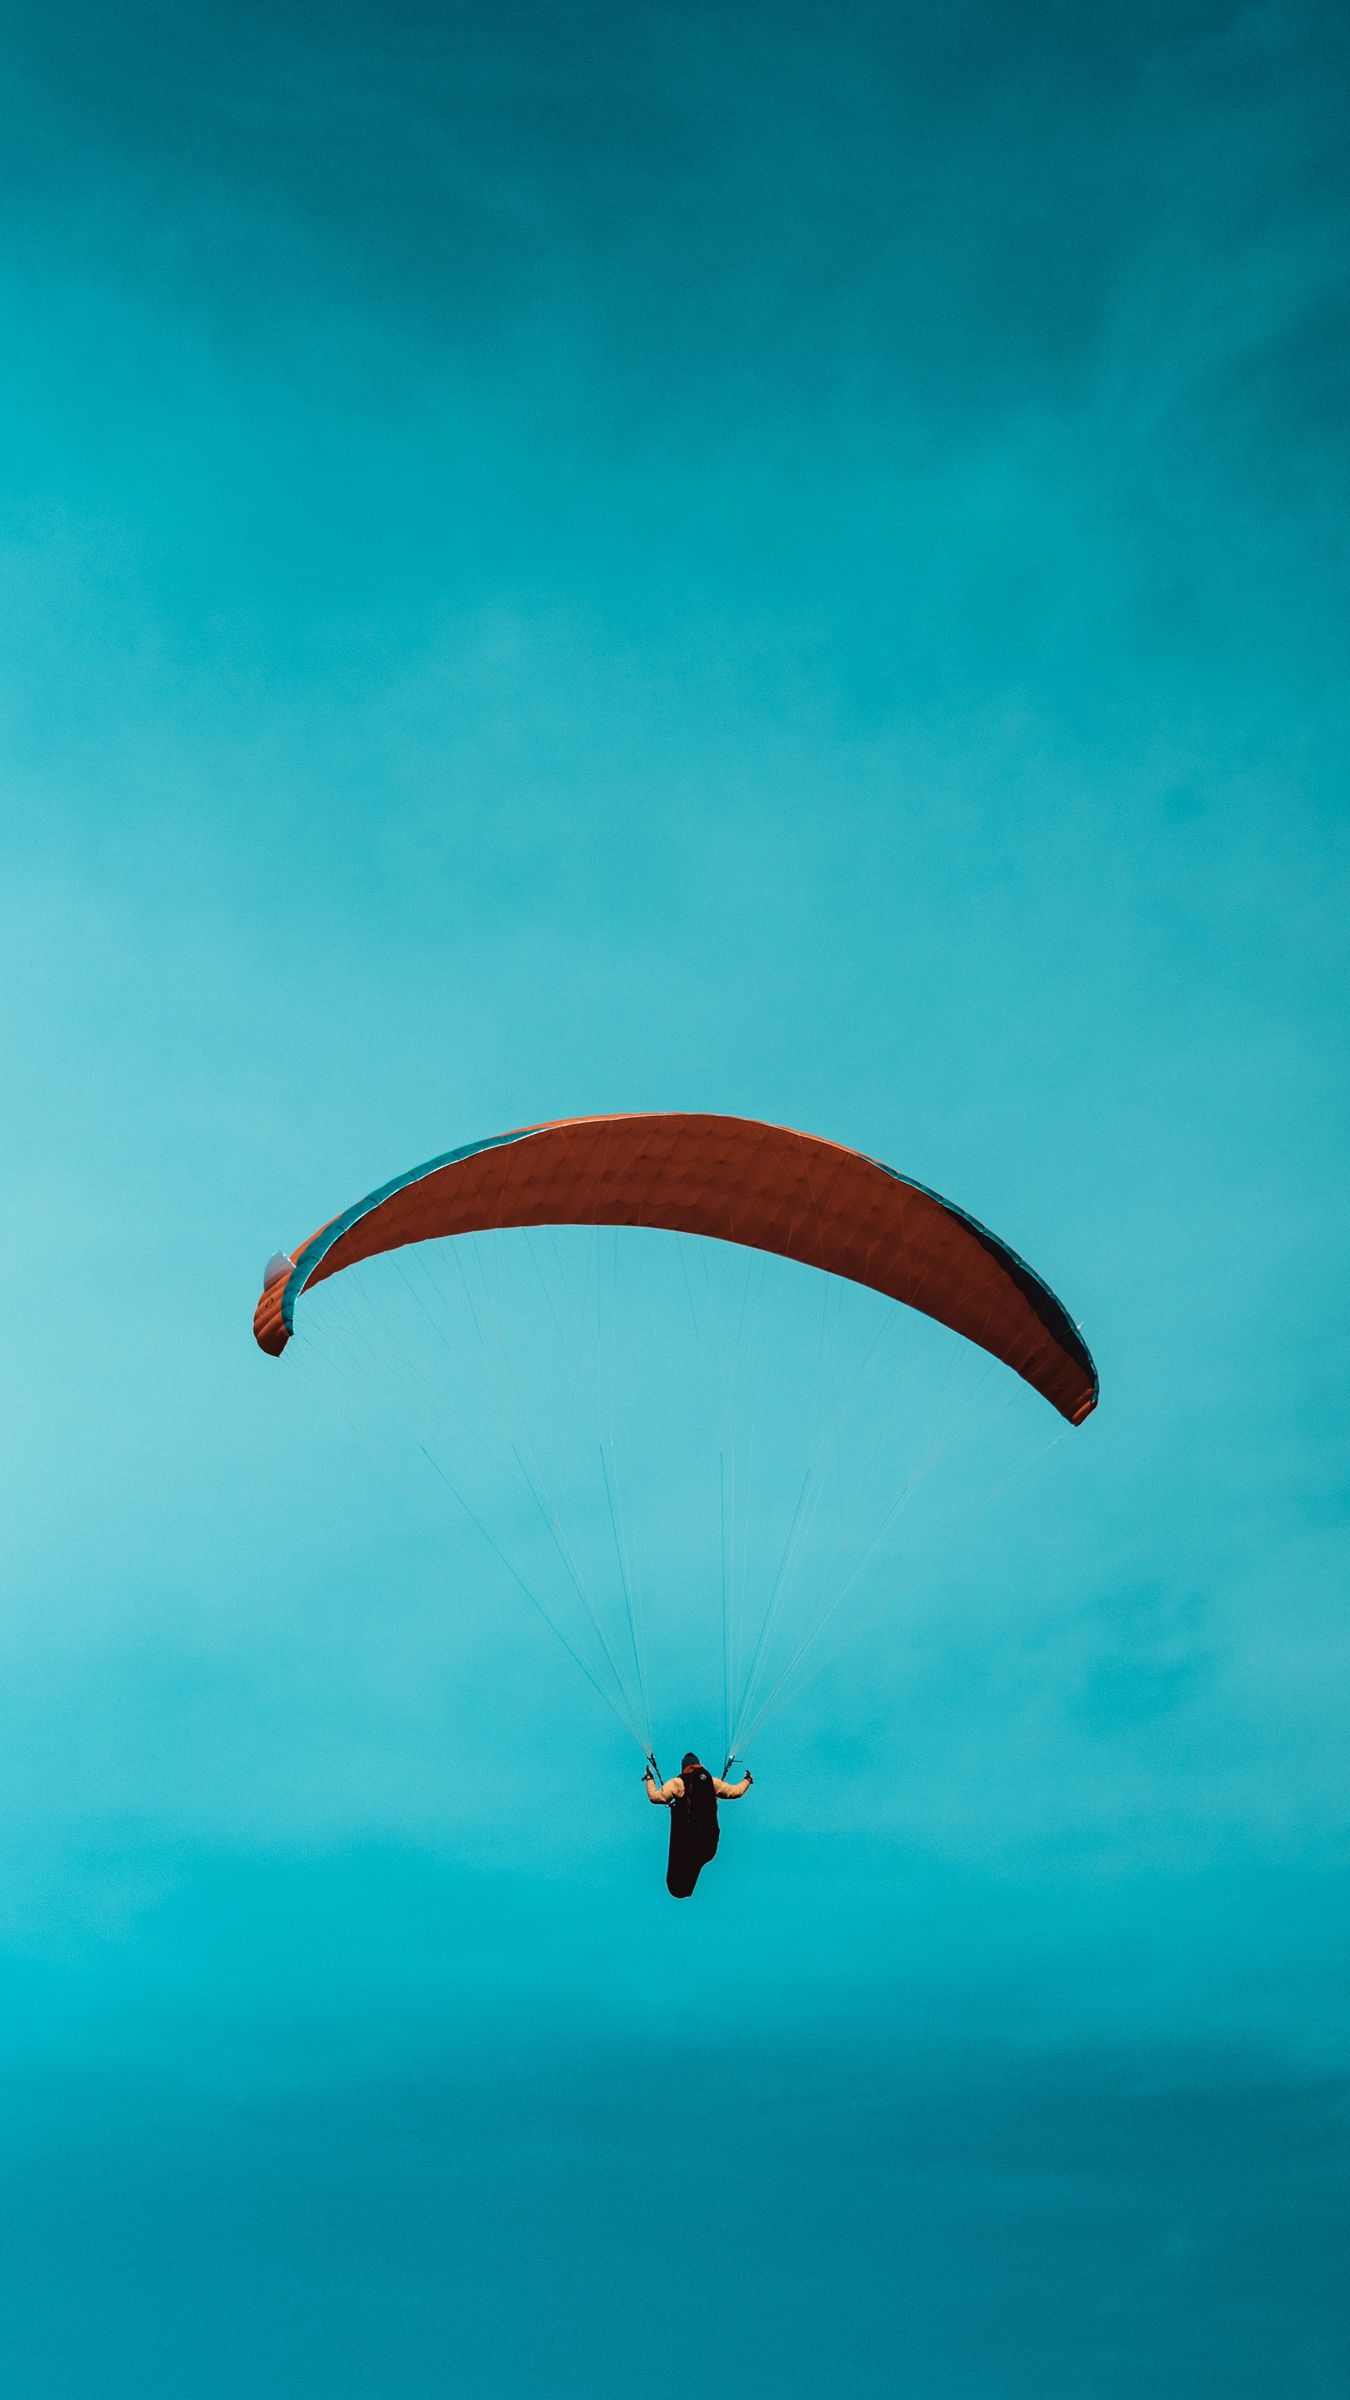 Download wallpaper 1350x2400 paraglider, parachute, skydiver, sky iphone  8+/7+/6s+/6+ for parallax hd background